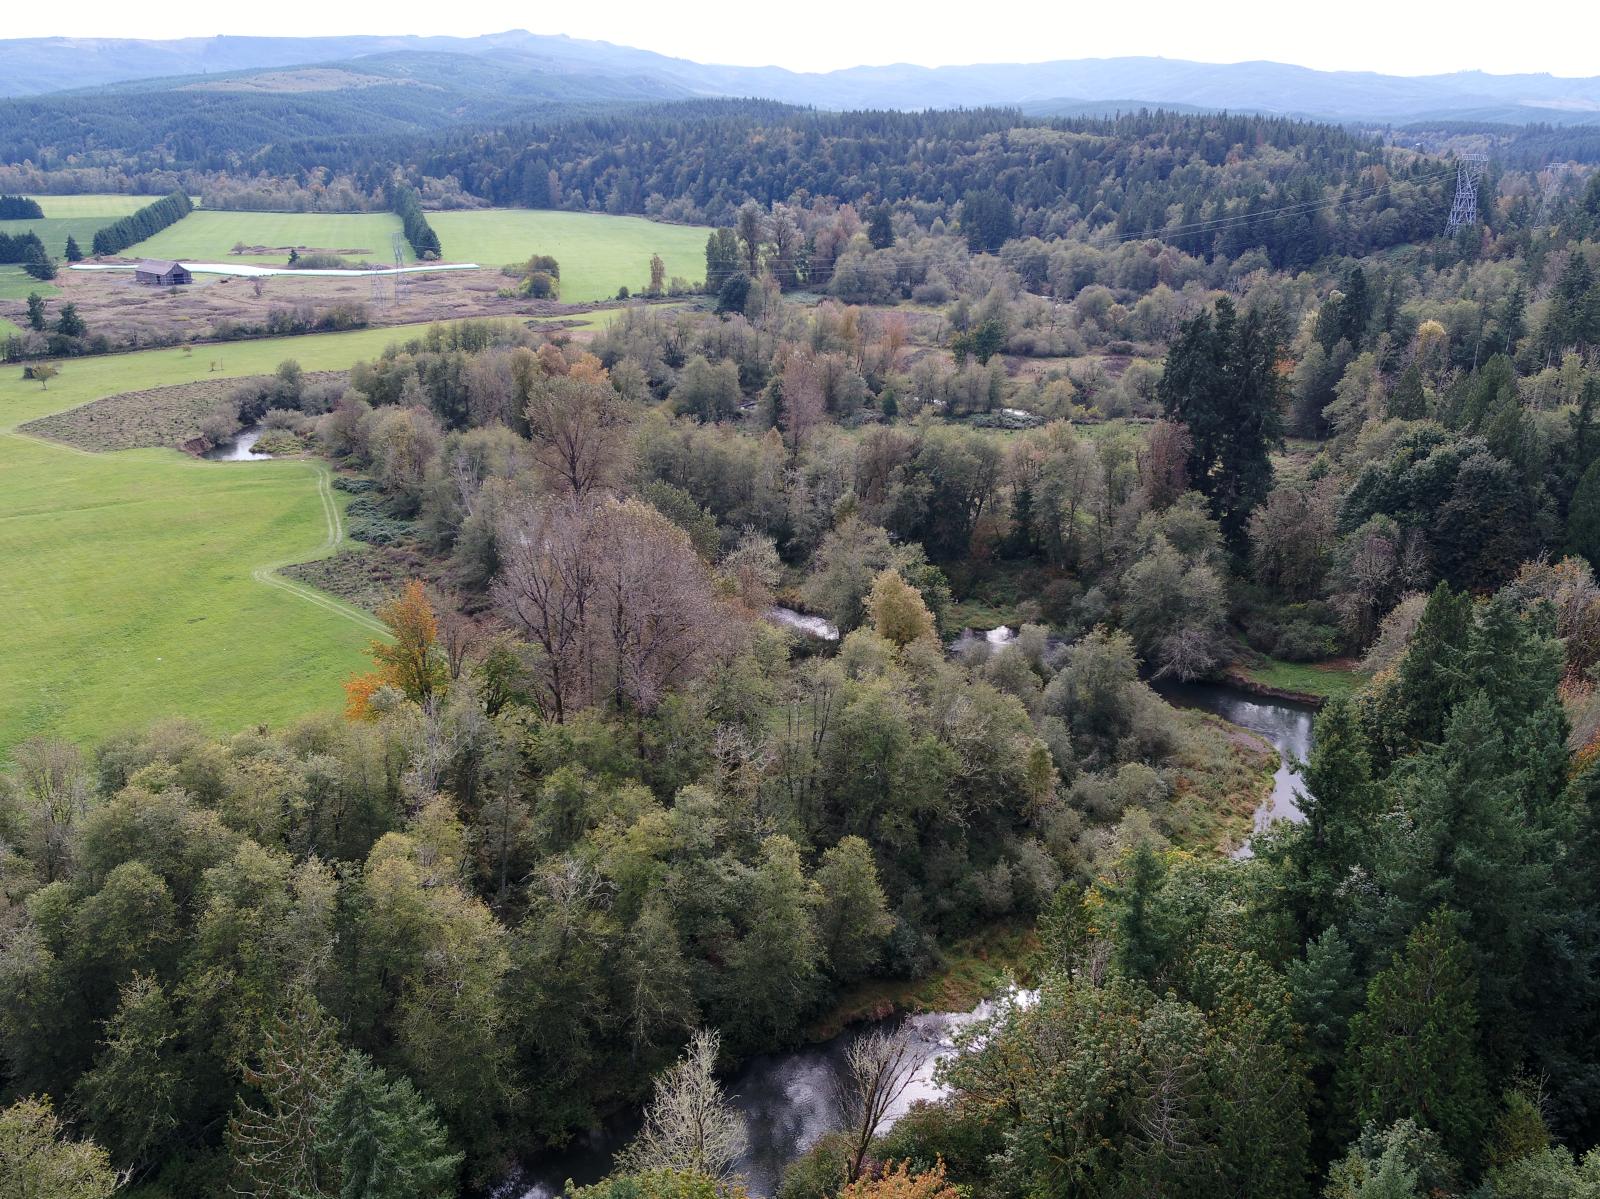 Aerial view of stretch of Skookumchuck River and surrounding agricultural fields